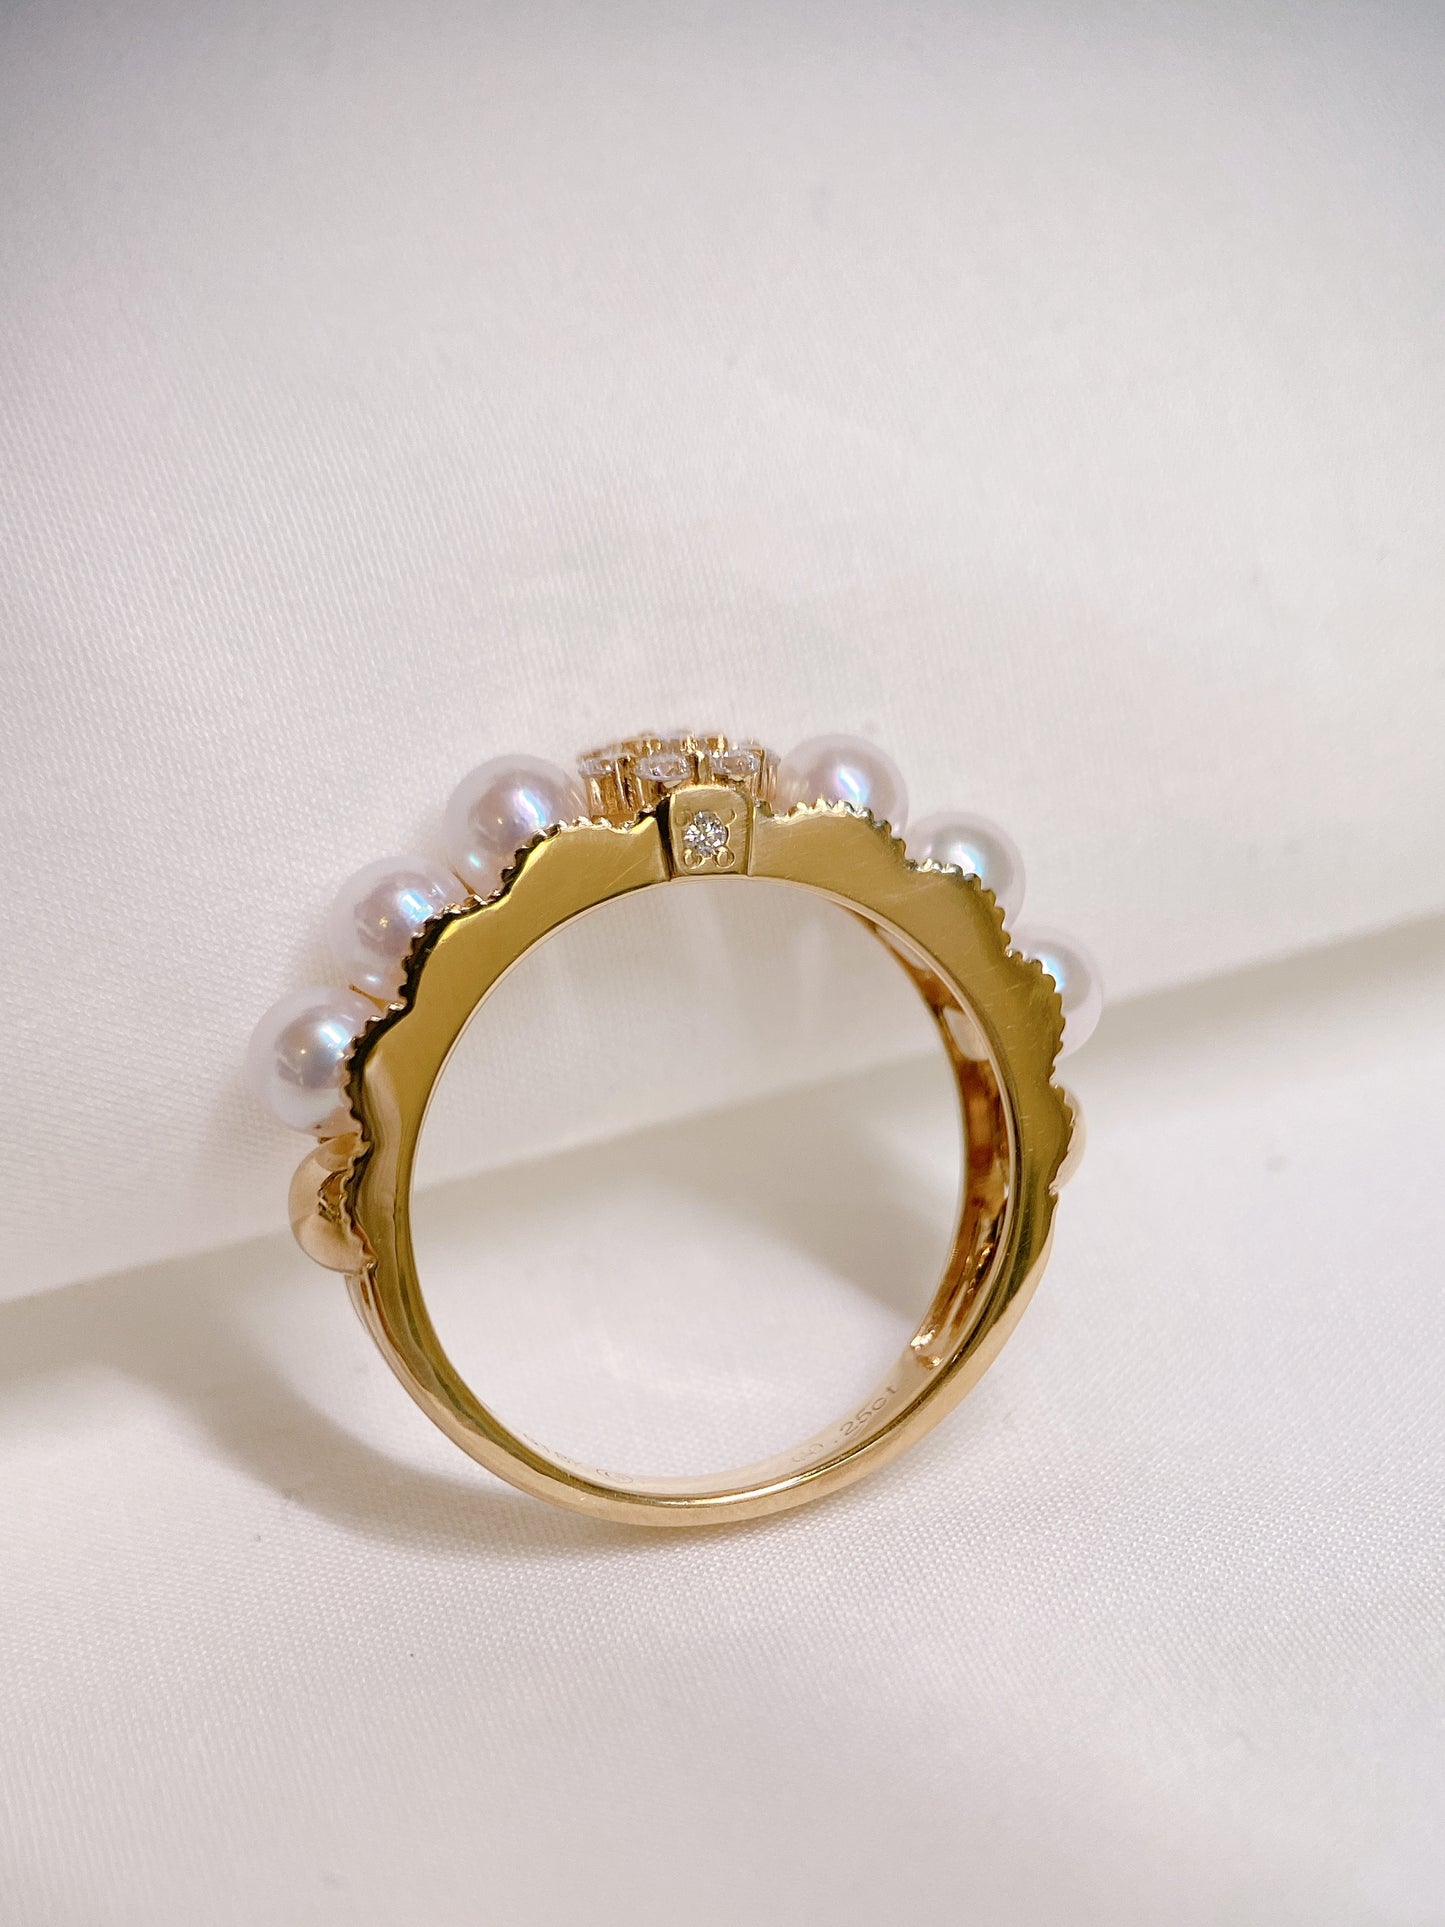 Baby Akoya Pearl Ring with Diamond in 18k Yellow Gold 0.25ct,3.5-4mm